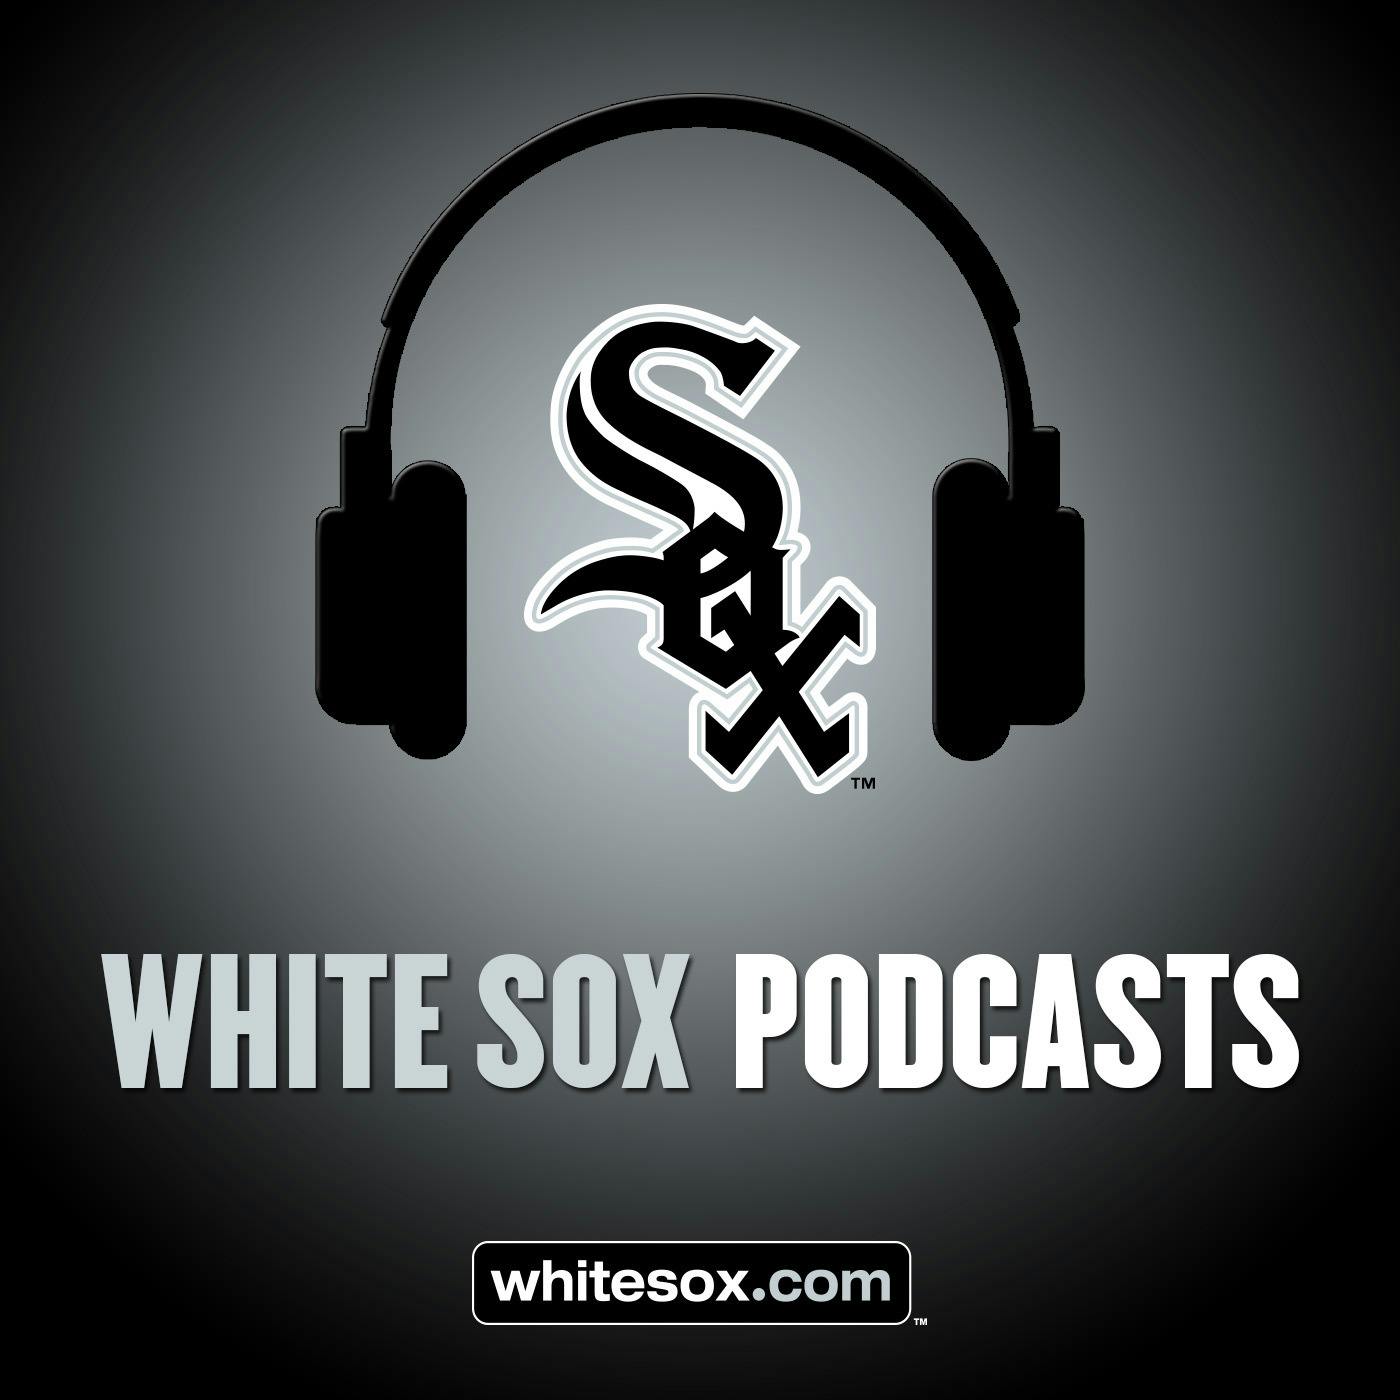 4/4/19 – White Sox Minute with Jason Benetti